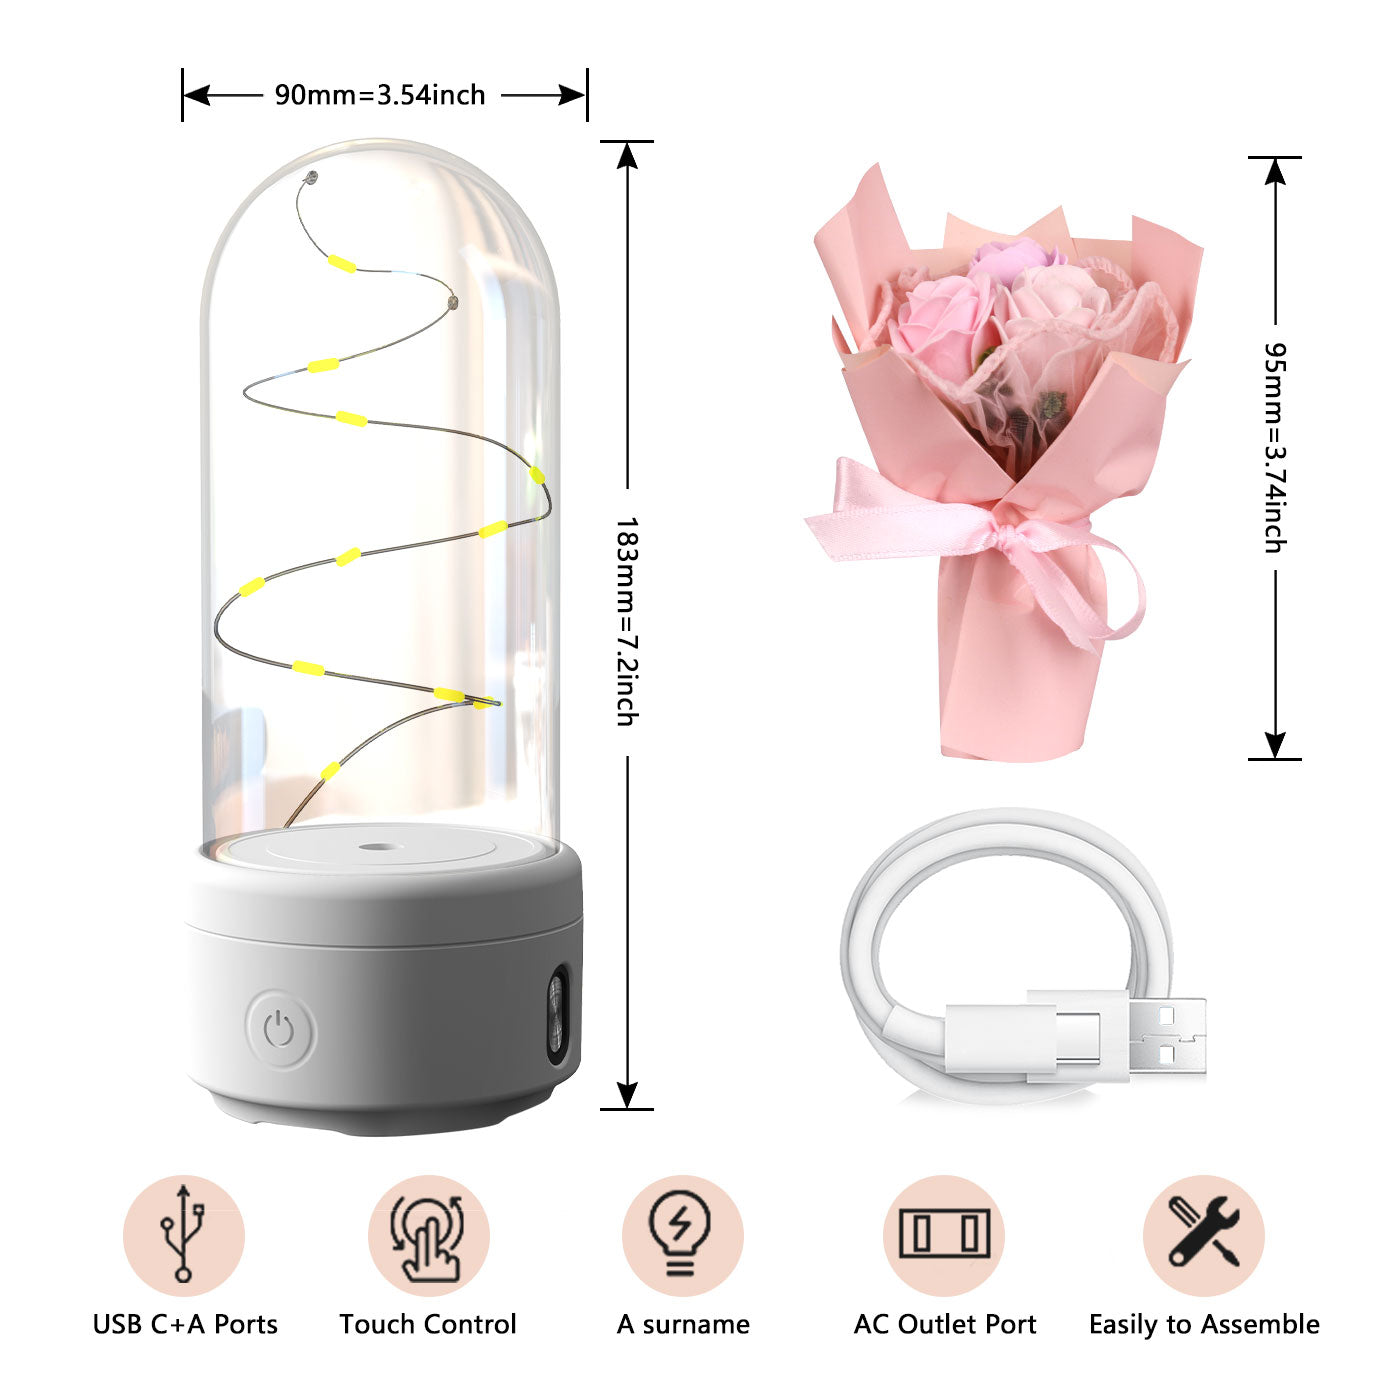 Creative 2 In 1 Bouquet LED Light And Bluetooth Speaker Mother's Day Gift Rose Luminous Night Light Ornament